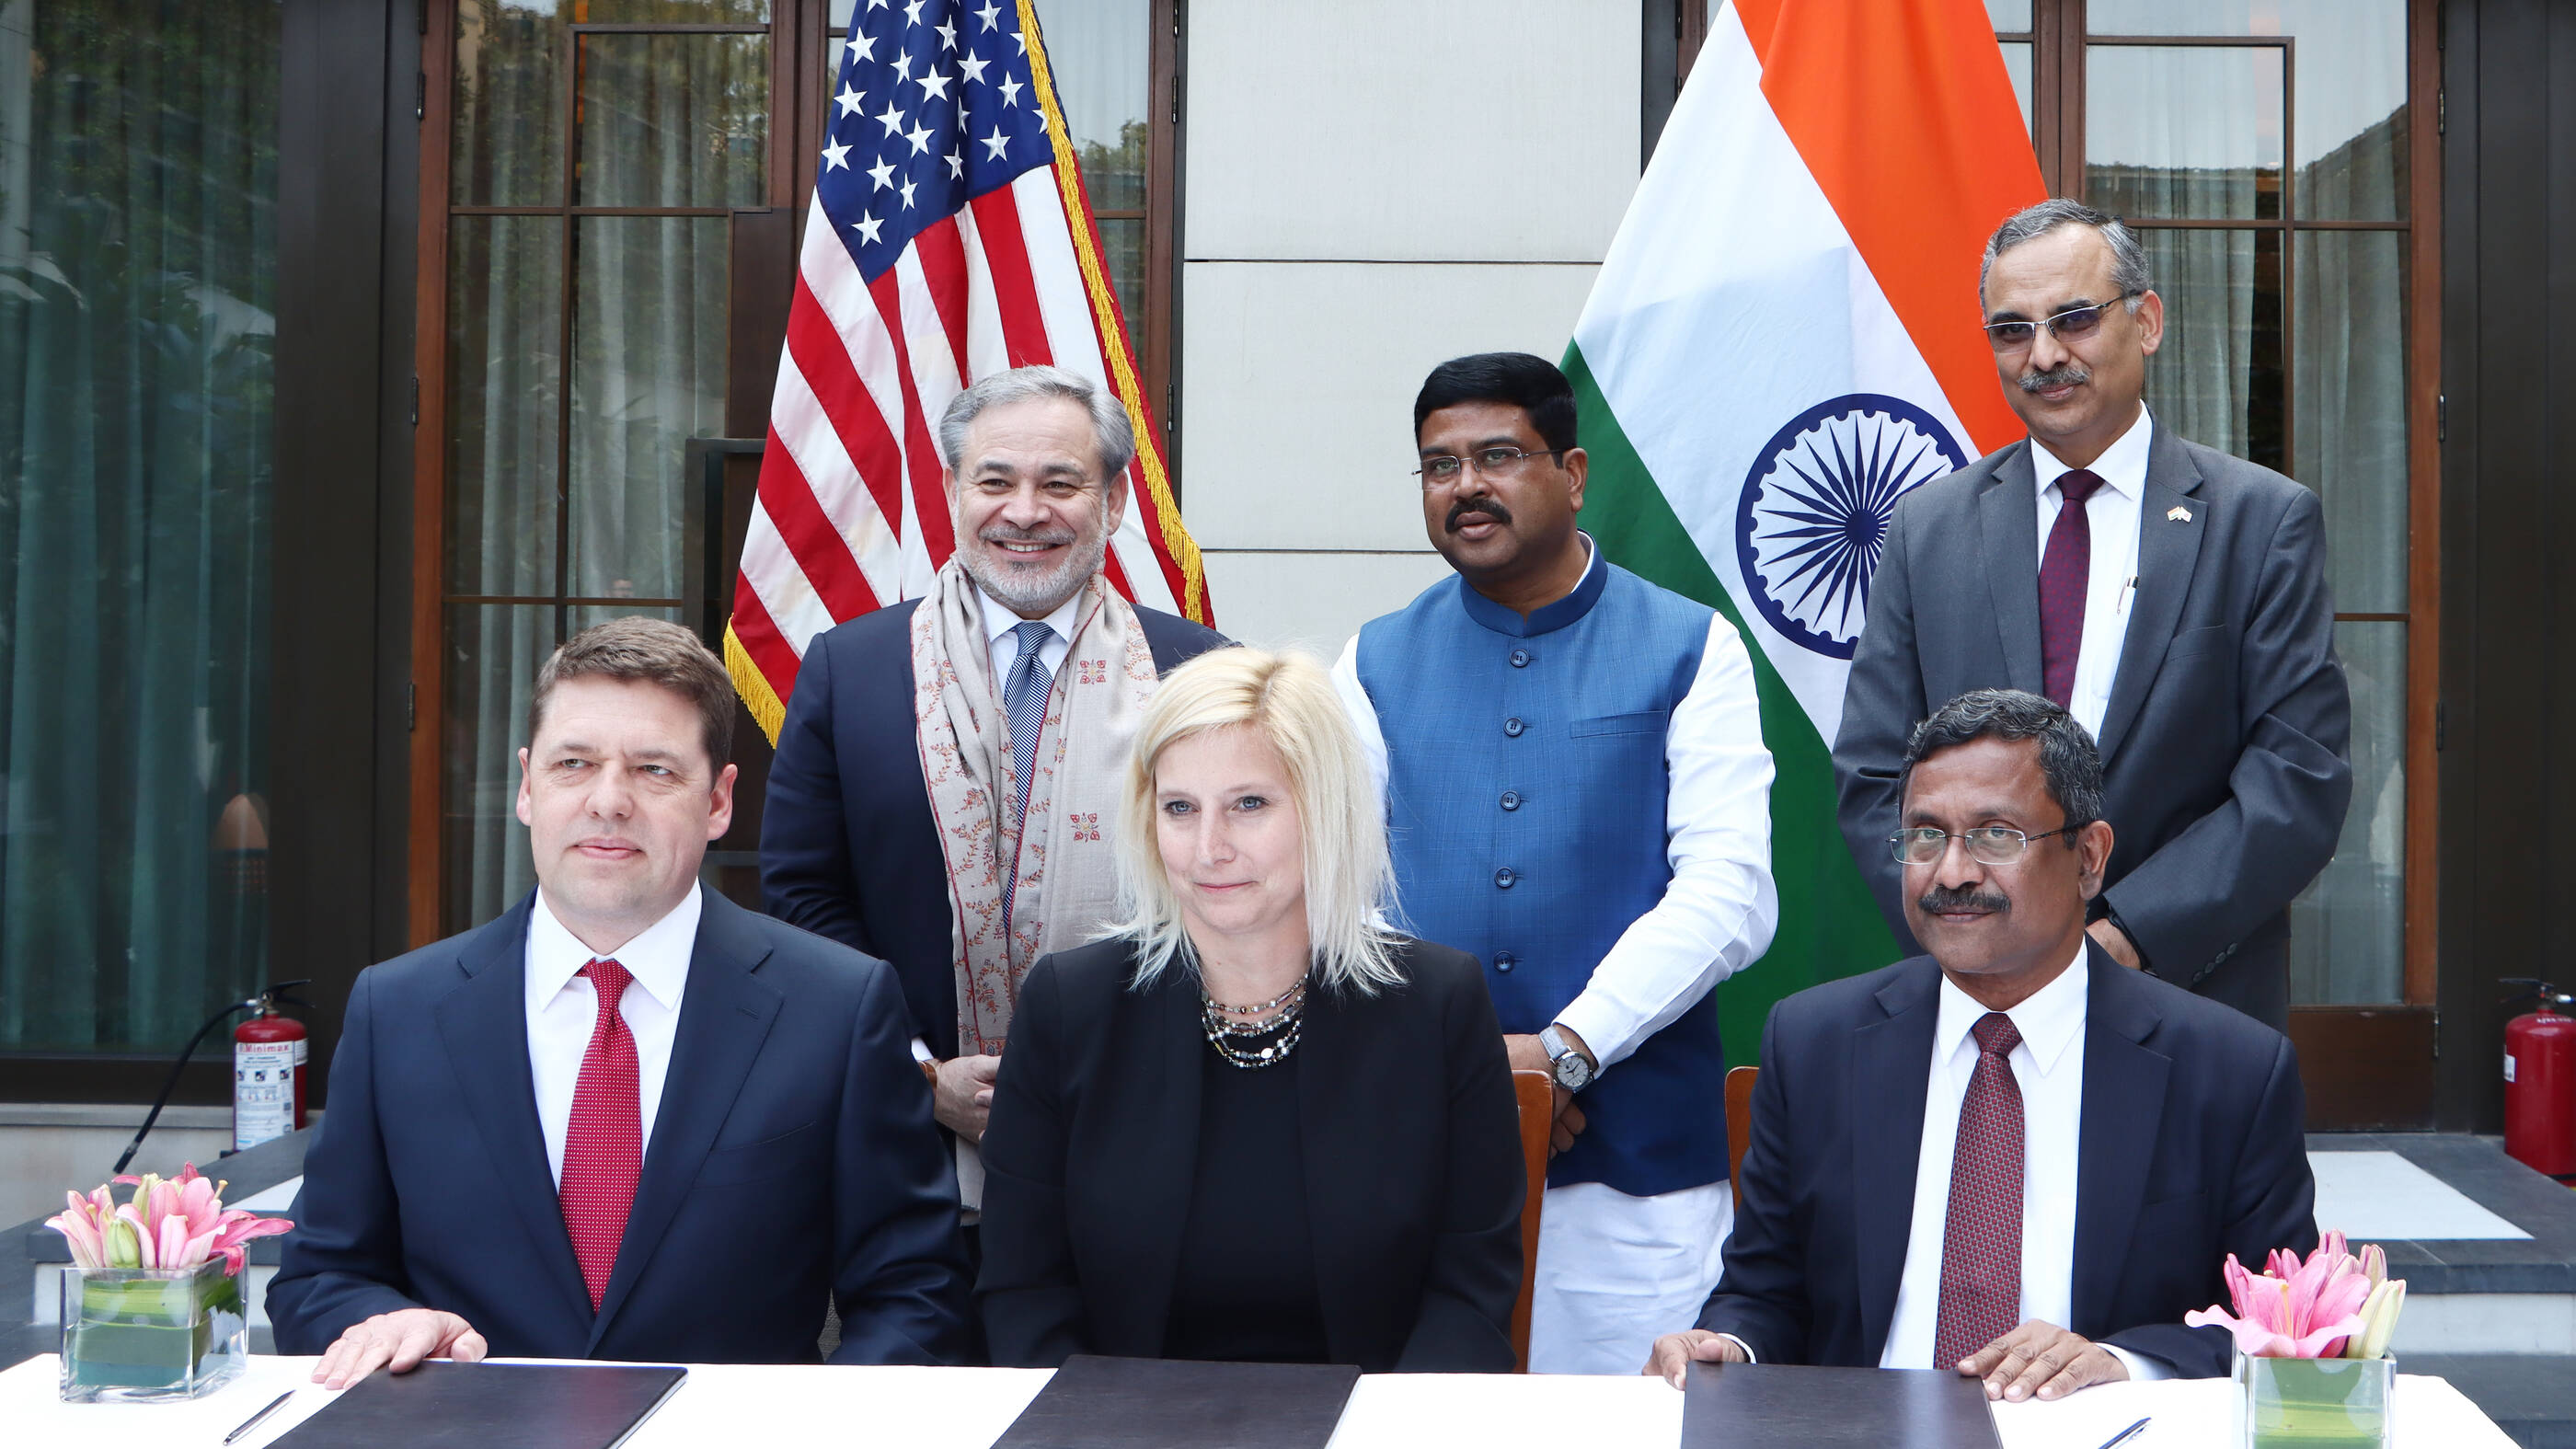 Seated (left to right): Alex Volkov, Chairman, ExxonMobil LNG Market Development Inc; Jillian Evanko, CEO, Chart Industries, Inc; GK Satish, Director (PBD), IndianOil
Standing (left to right): US Energy Secretary Dan Brouillette, Indias Minister of Petroleum and Gas Dharmendra Pradhanand IndianOil Chairman Sanjiv Singh